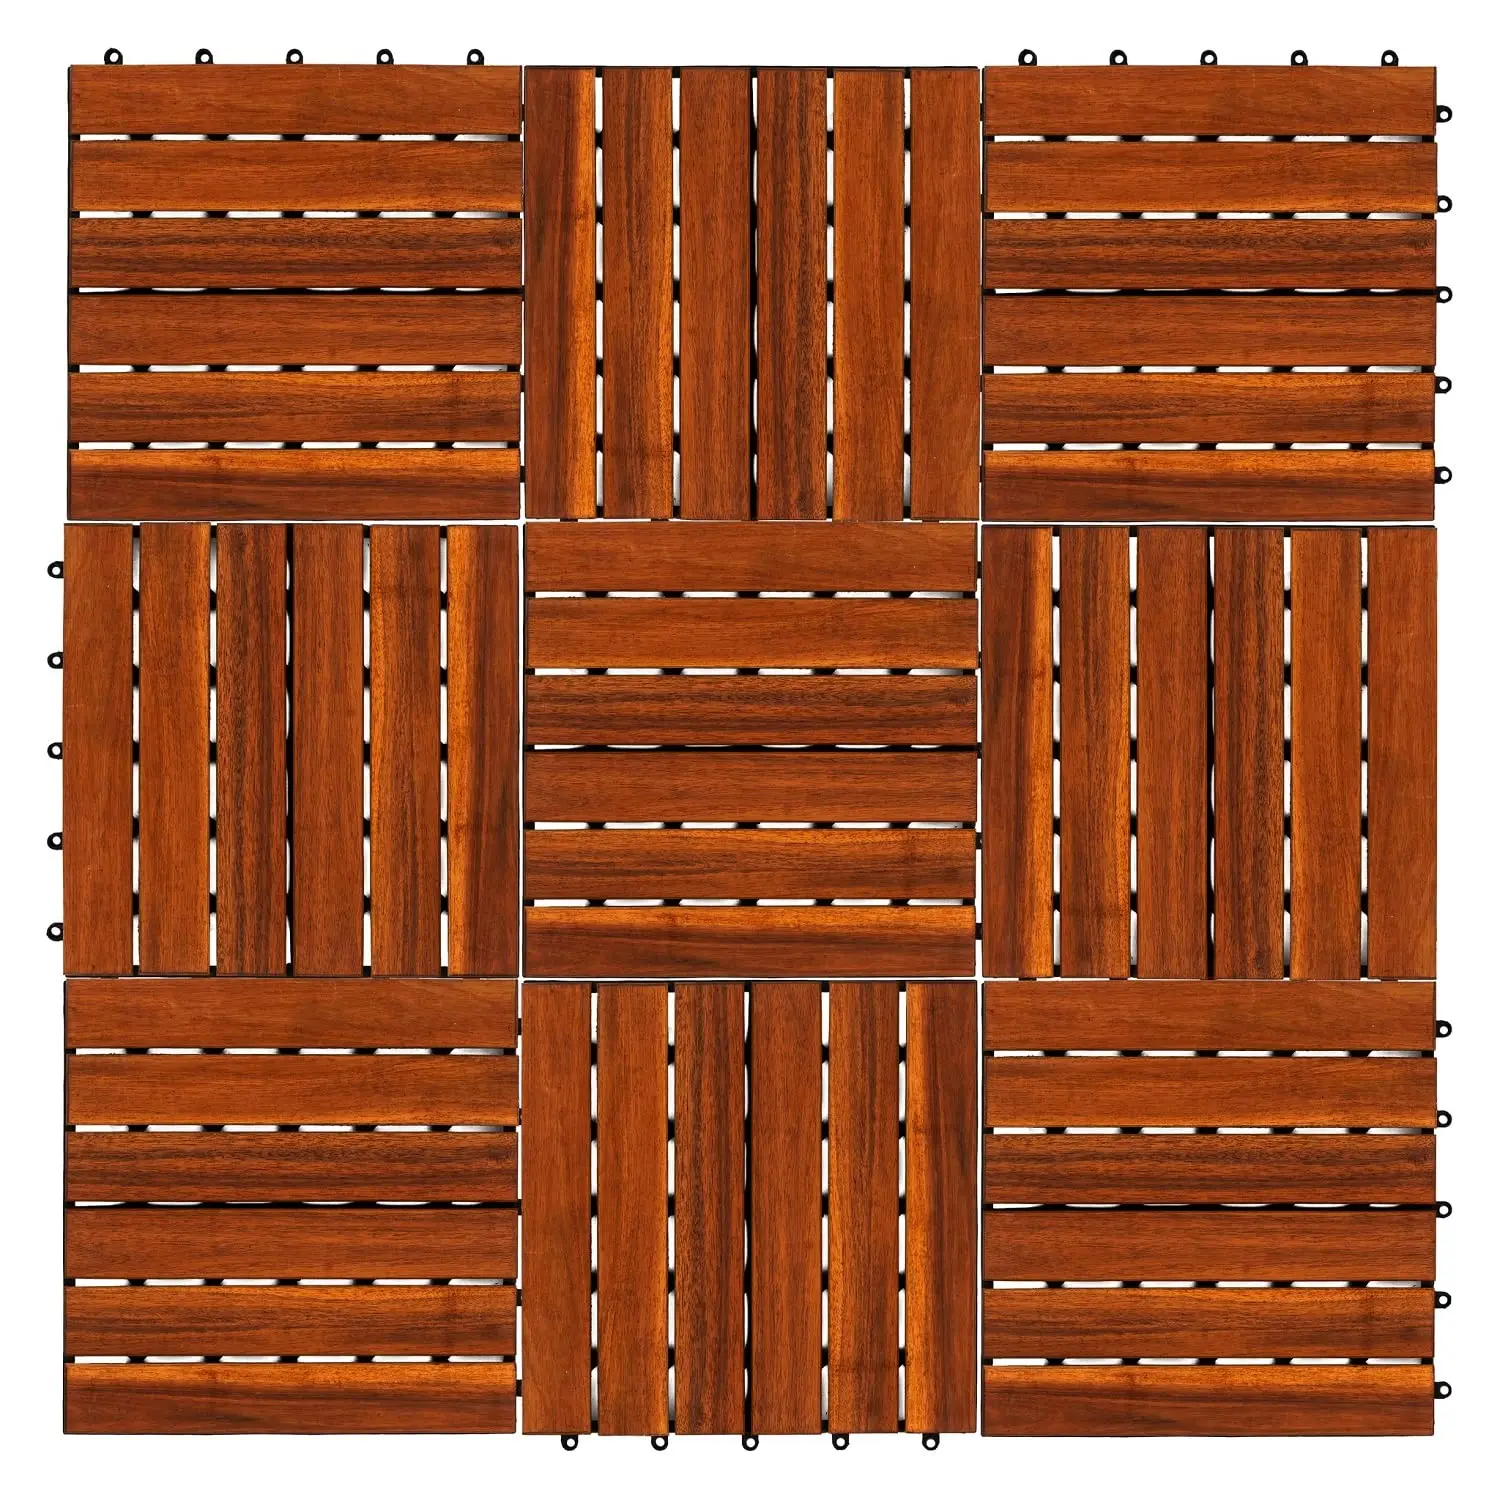 bamboo Solid Wood Interlocking Flooring Tiles (Pack of 9), Acacia Hardwood Deck Tiles with different color and pattern